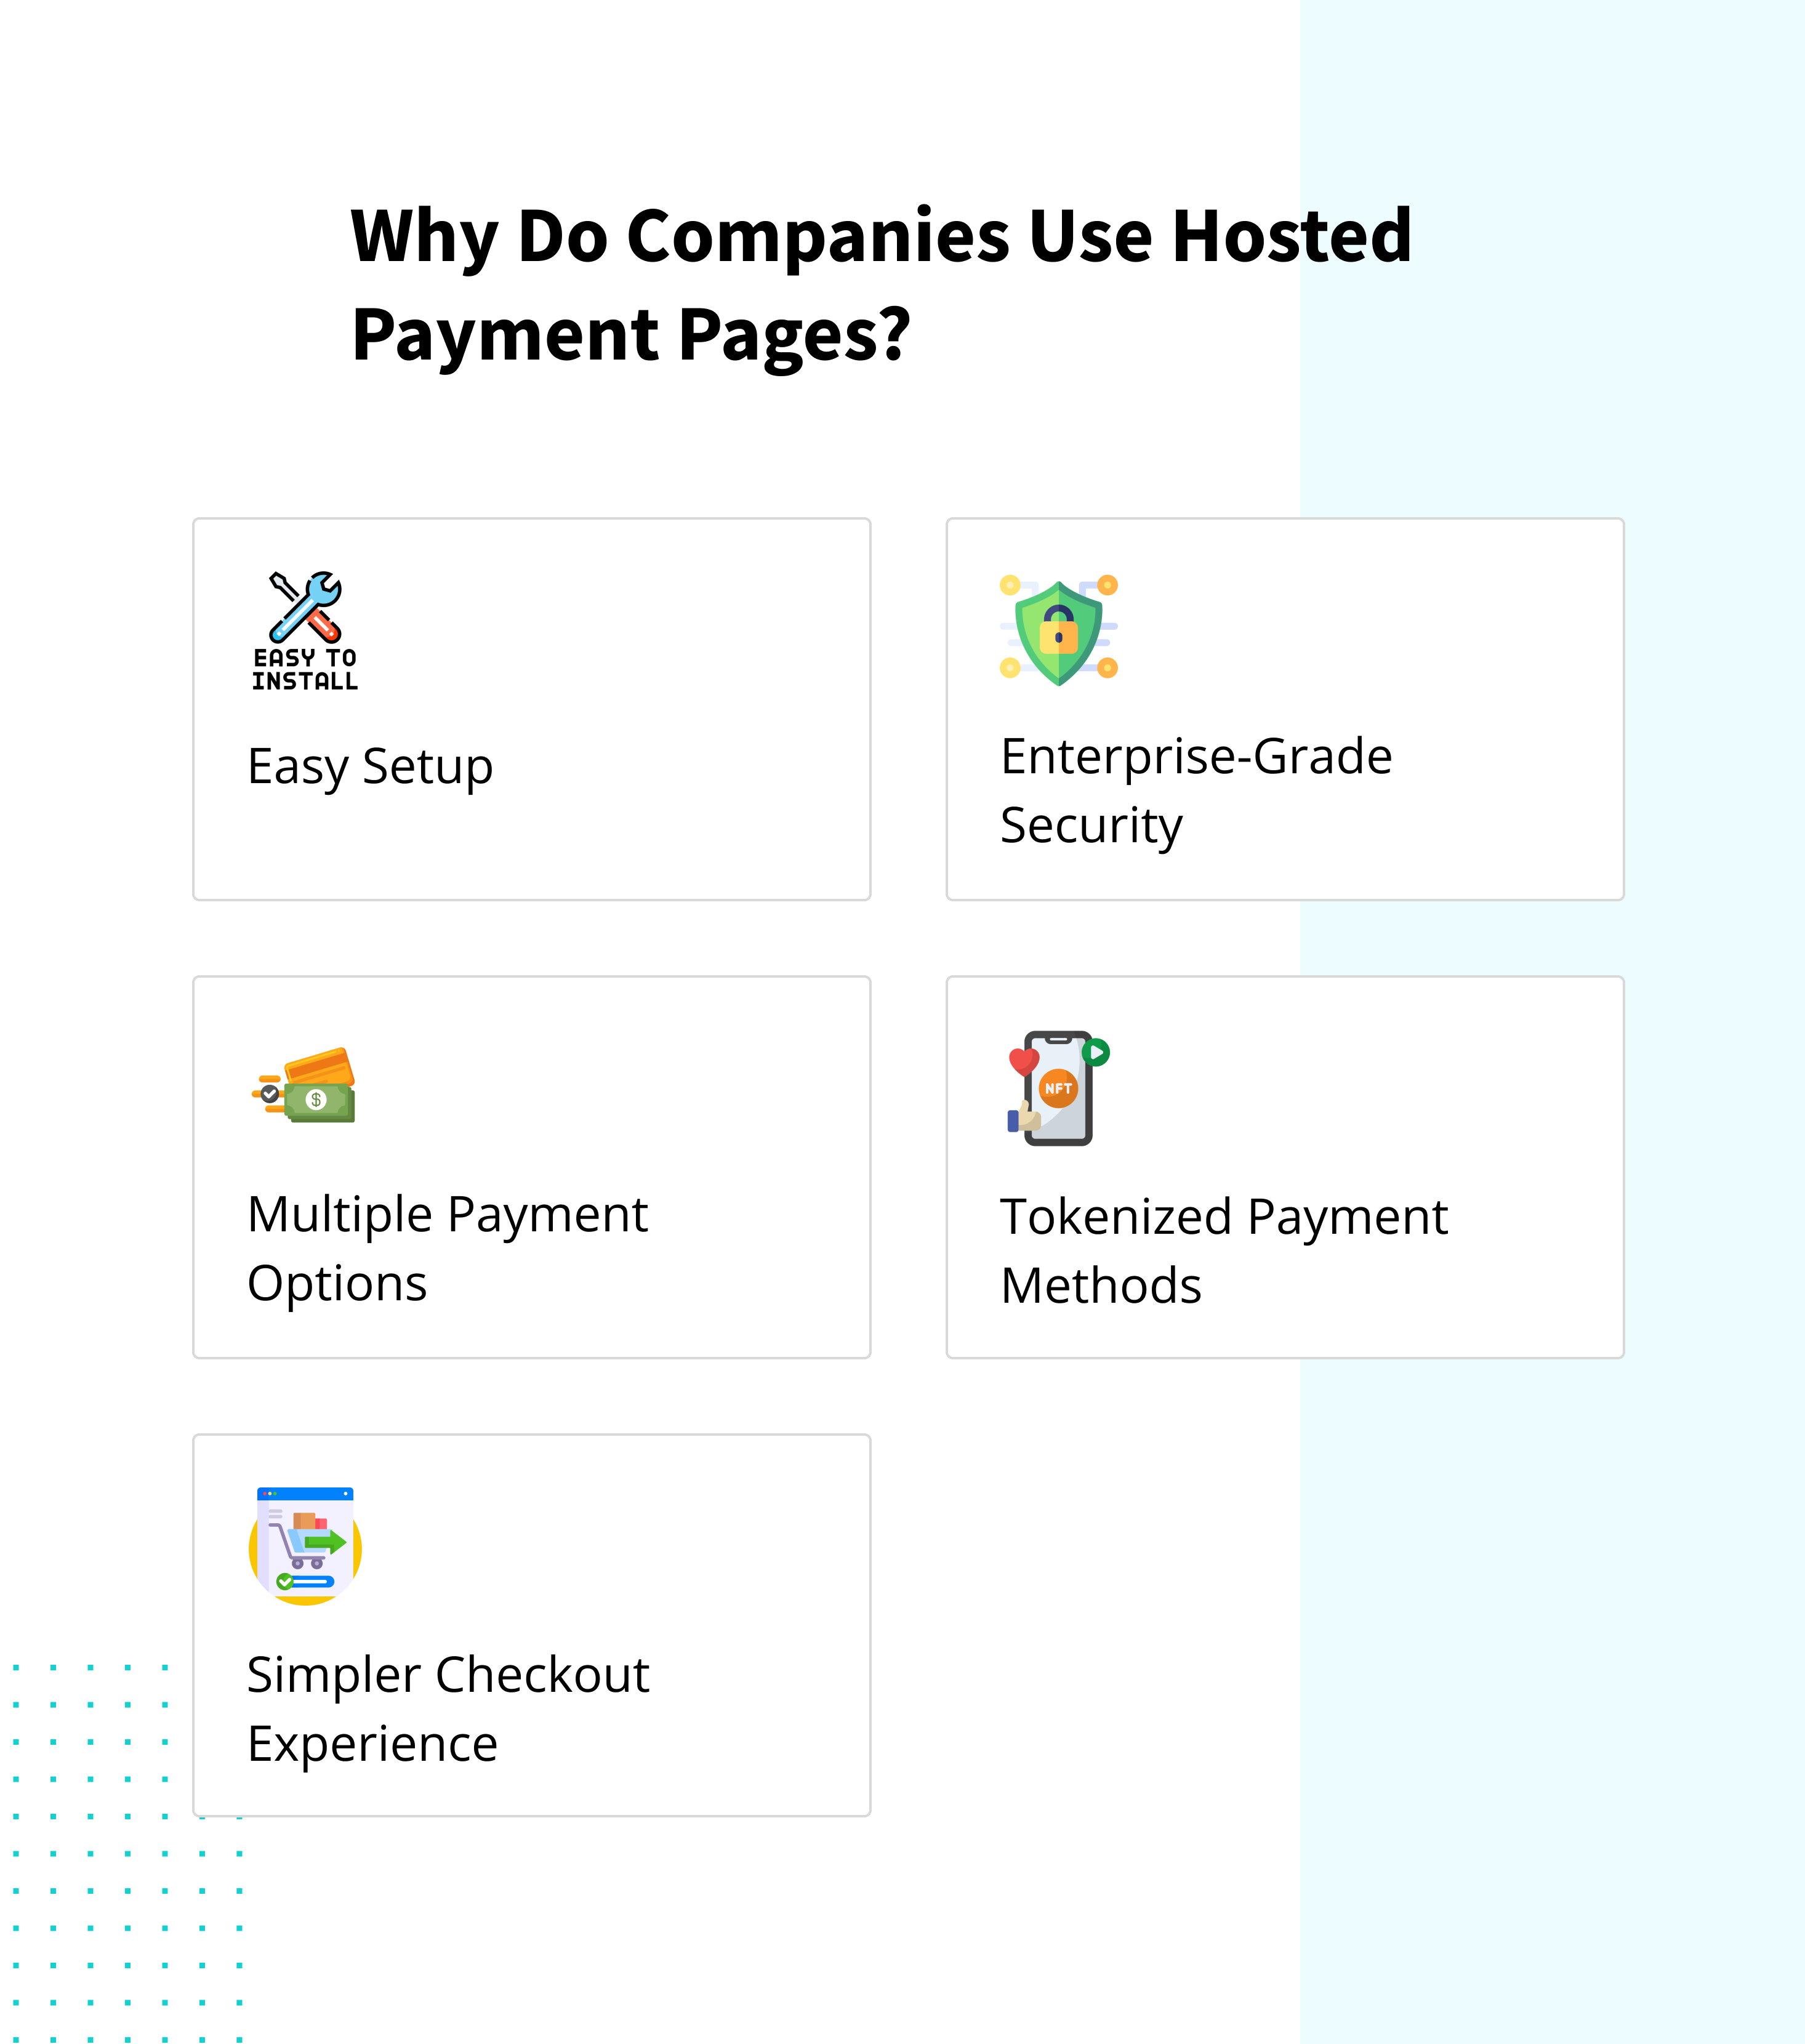 Why Do Companies Use Hosted Payment Pages?